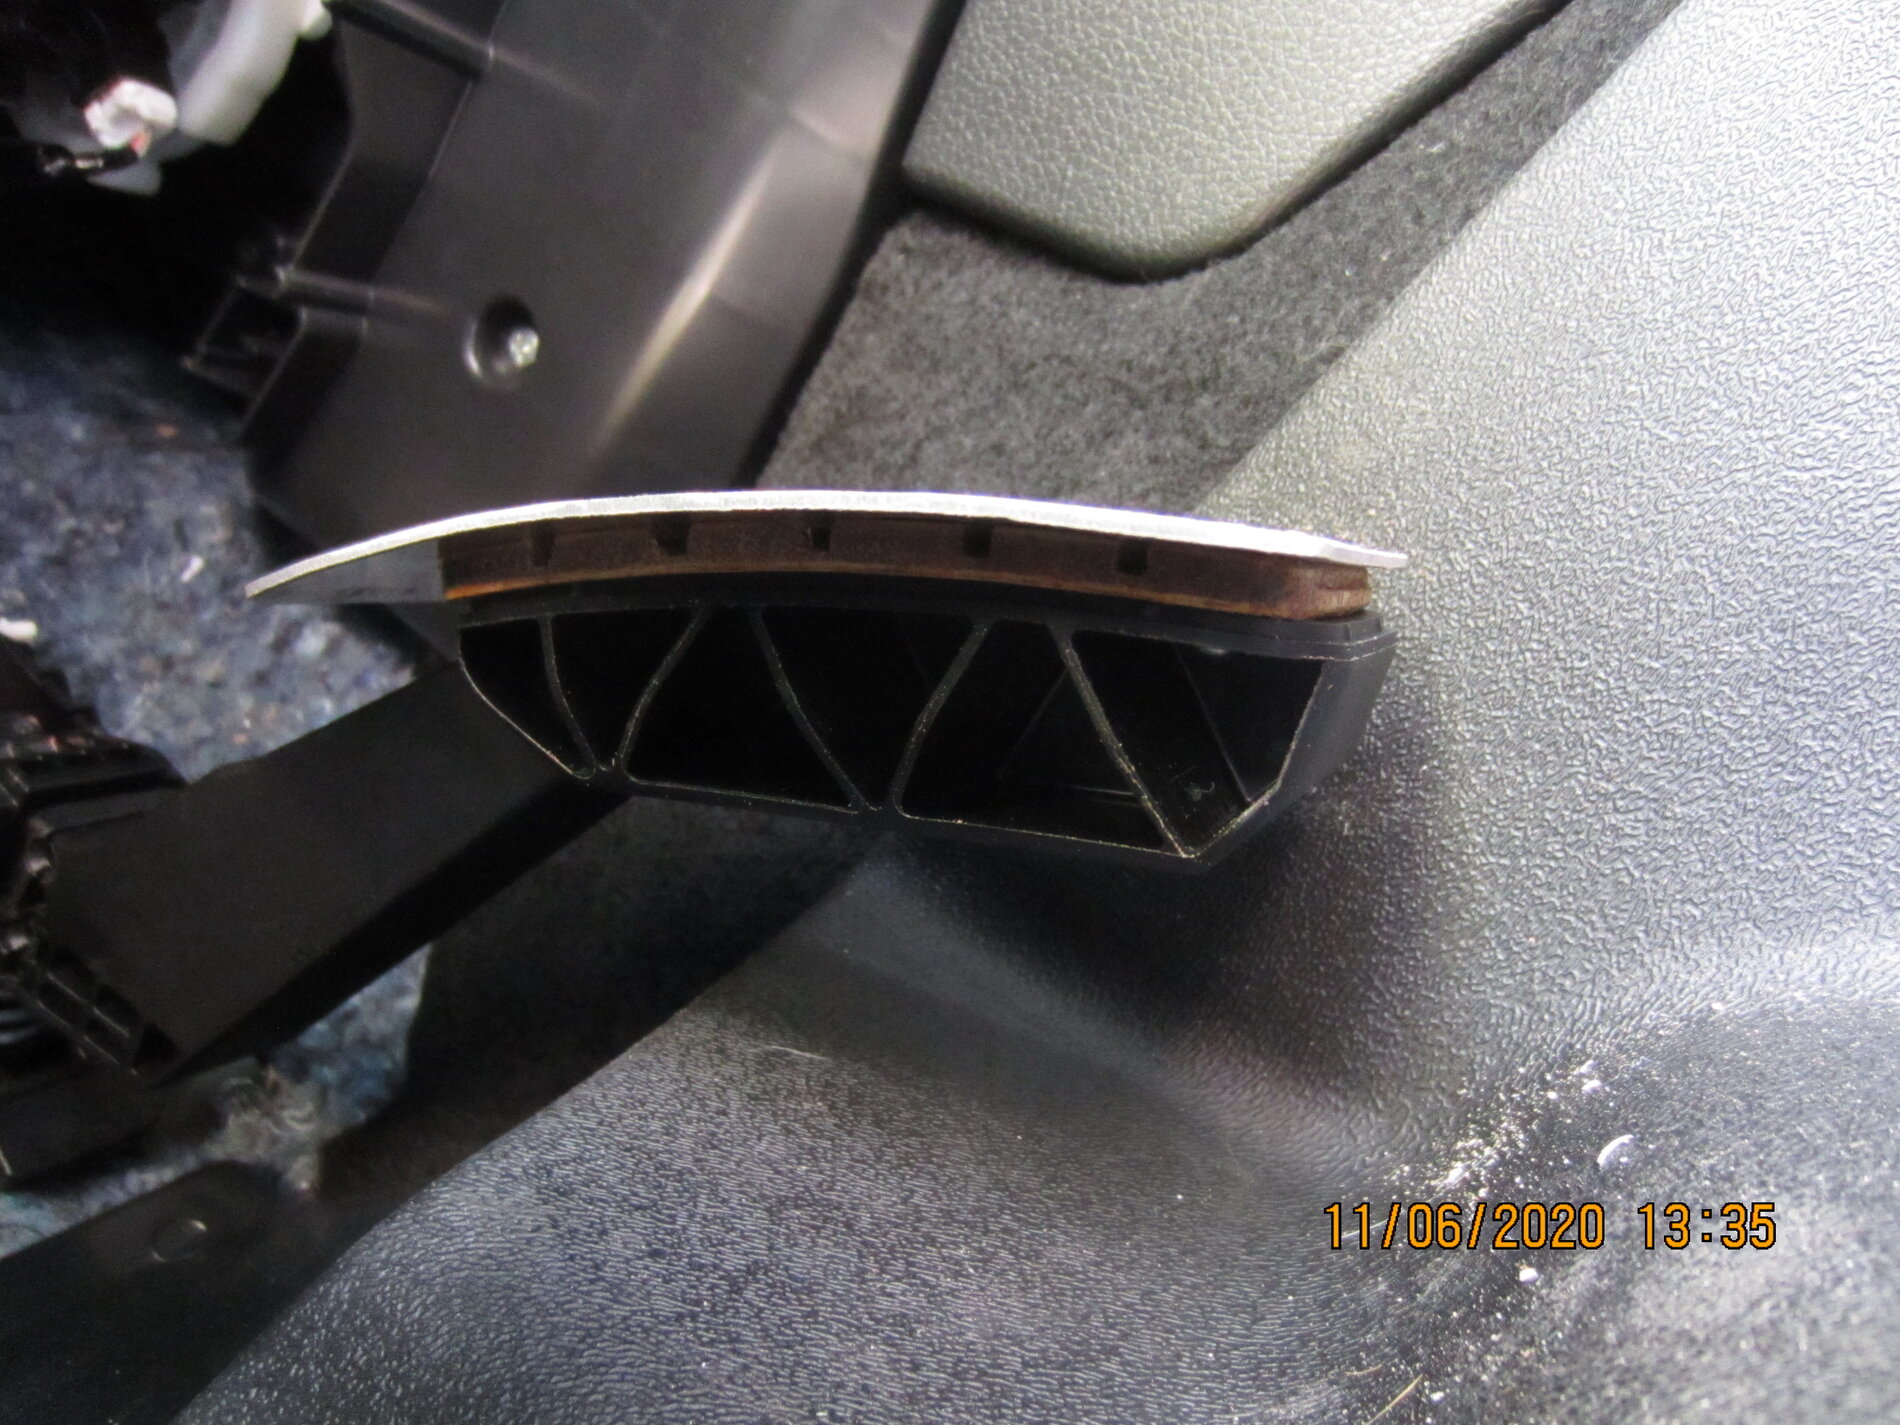 Honda Civic 10th gen Heel Toe and Pedal Placement IMG_6003.JPG